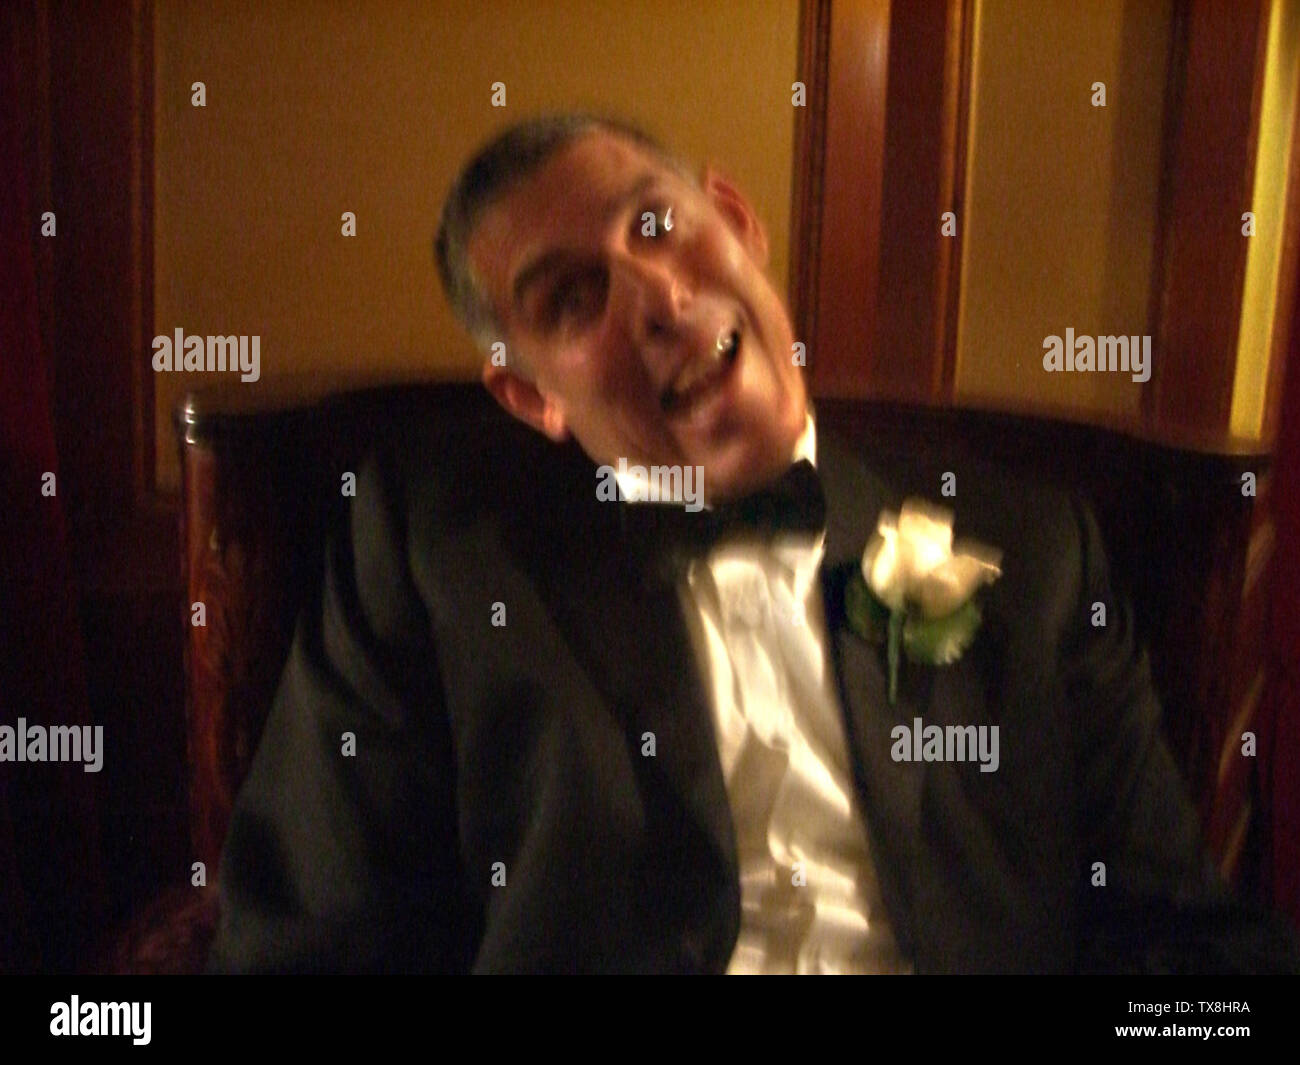 Lyor Cohen hamming it up at a wedding. Pasadena, CA 01/15/2006 Artfully taken by me. From my personal photo collection.; 11 May 2007 (original upload date); Transferred from en.pedia to Commons.; Arctic Monkies at English pedia; Stock Photo